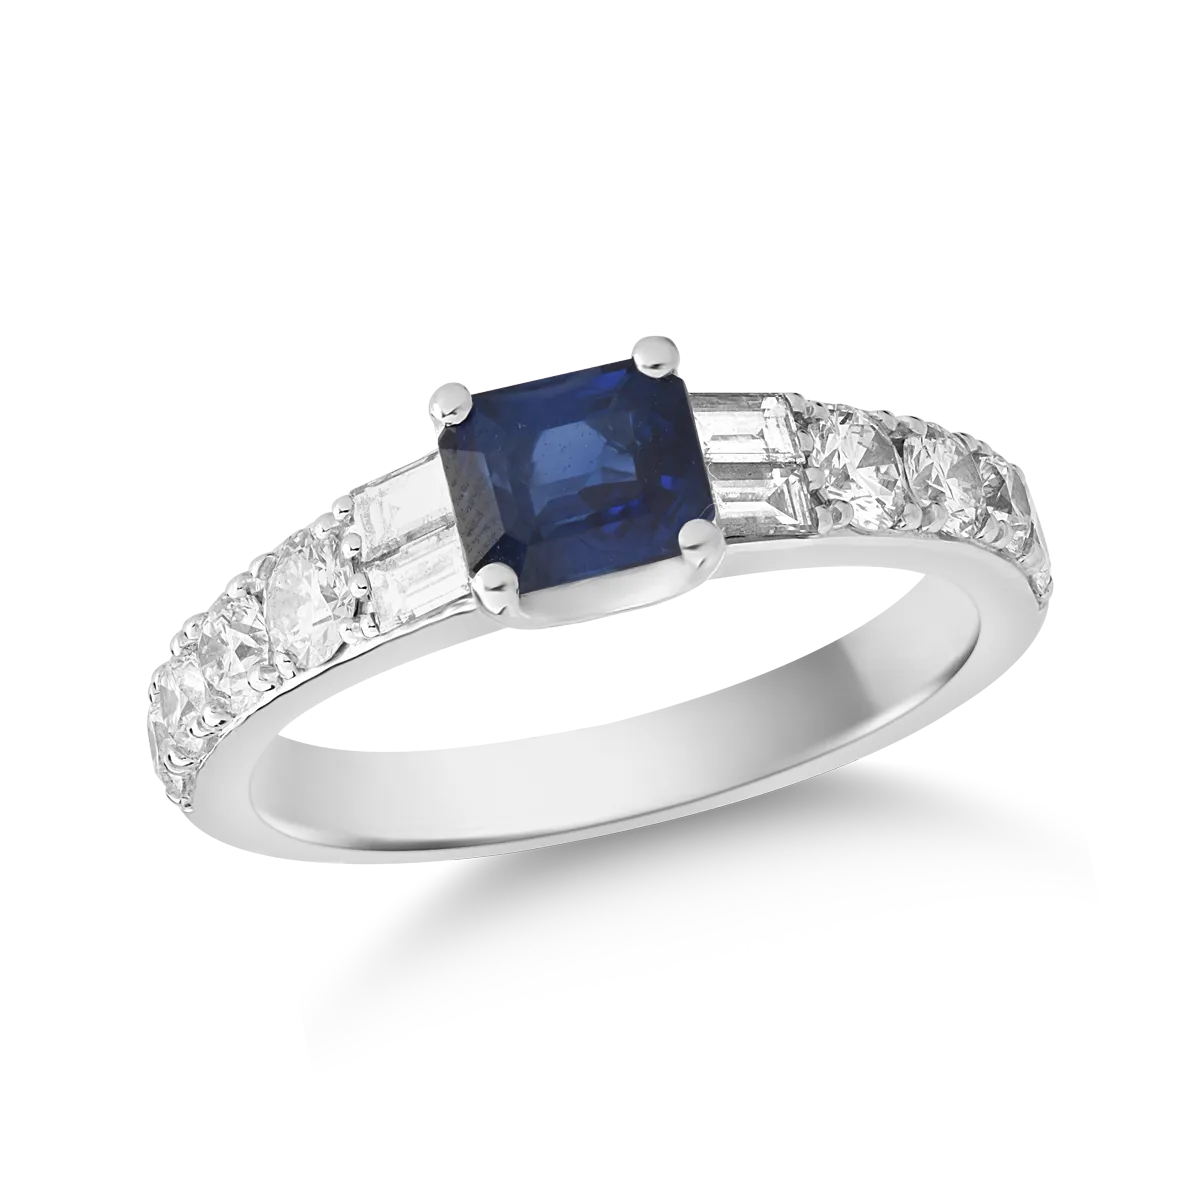 18K white gold ring with 1.08ct sapphire and 0.98ct diamonds